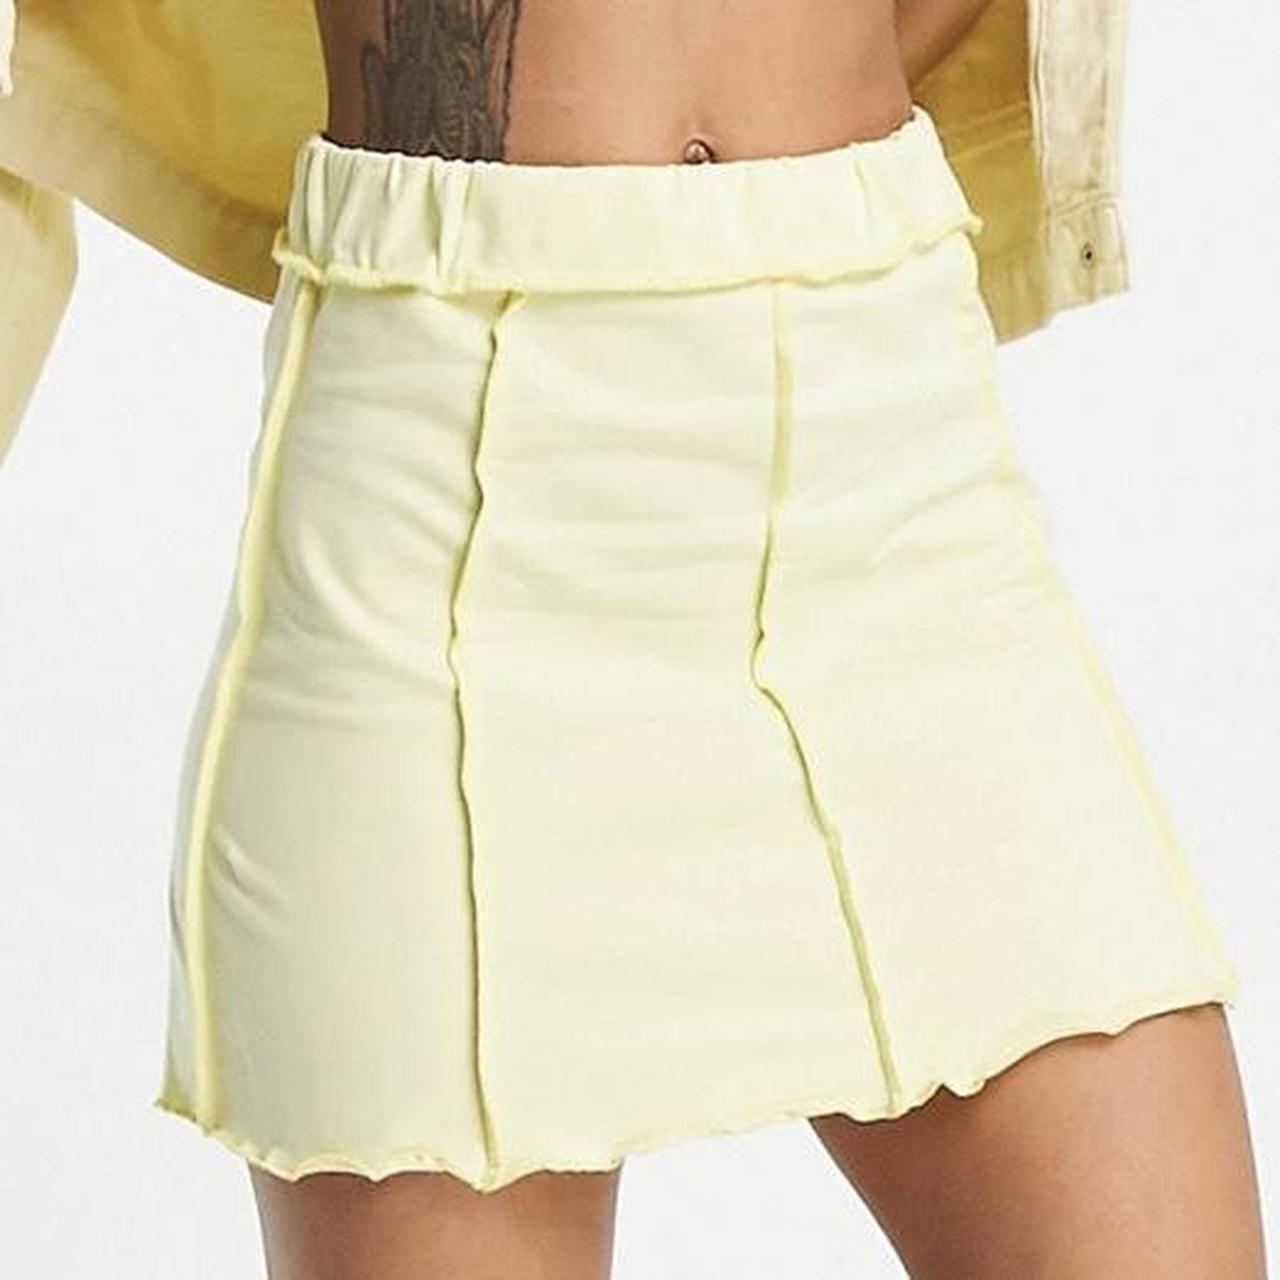 ASYOU seam detail co ord mini skirt in yellow with... - Depop